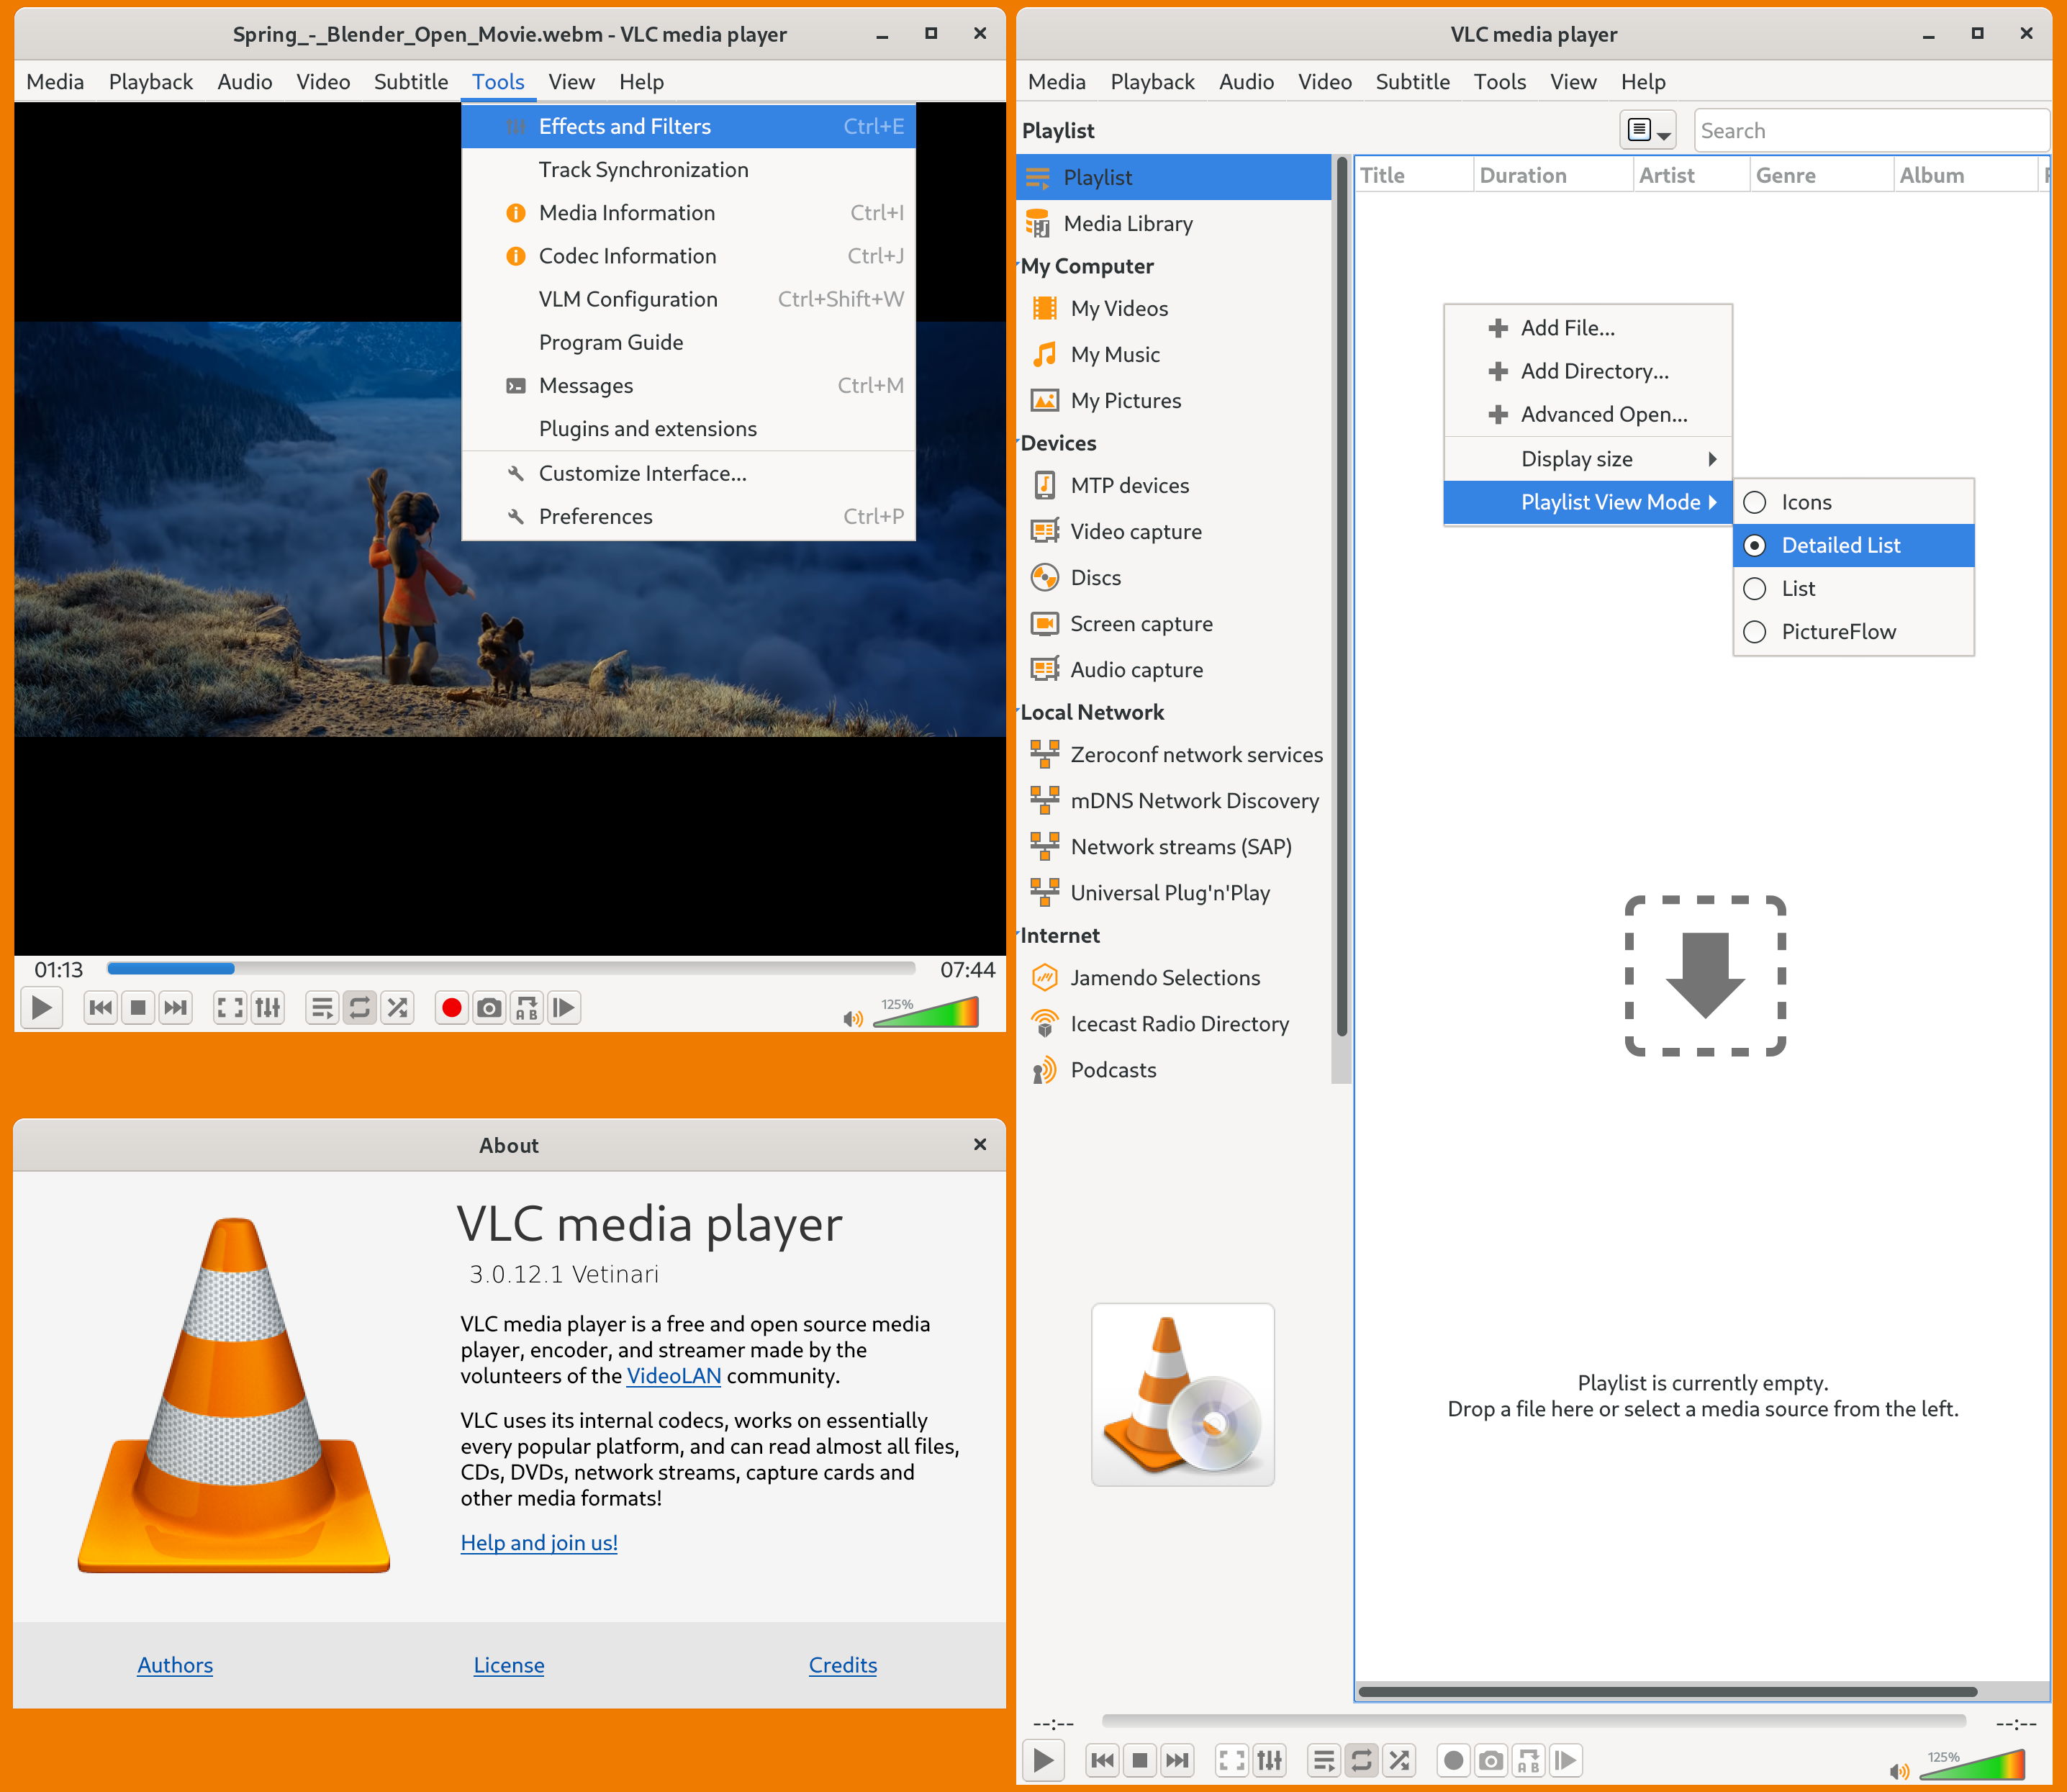 VLC Media Player: A free, open-source media player that supports a wide range of video and audio formats.
PotPlayer: A lightweight media player with customizable interface and advanced settings.